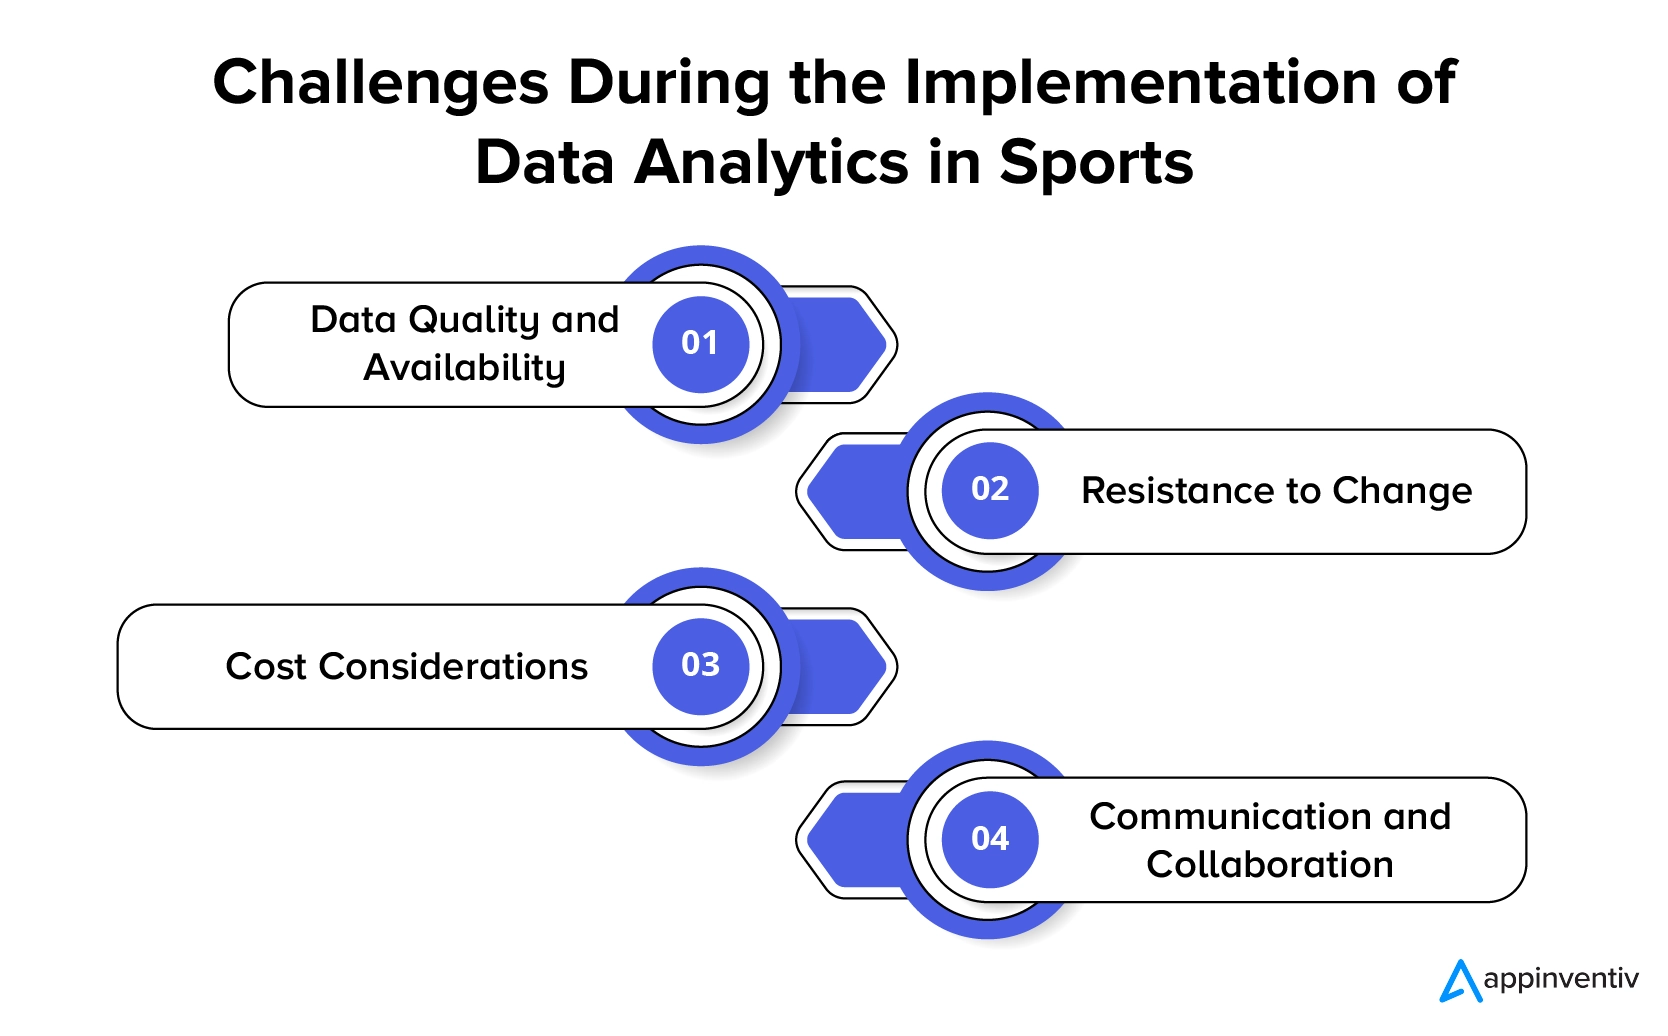 Challenges during the implementation of data analytics in sports 